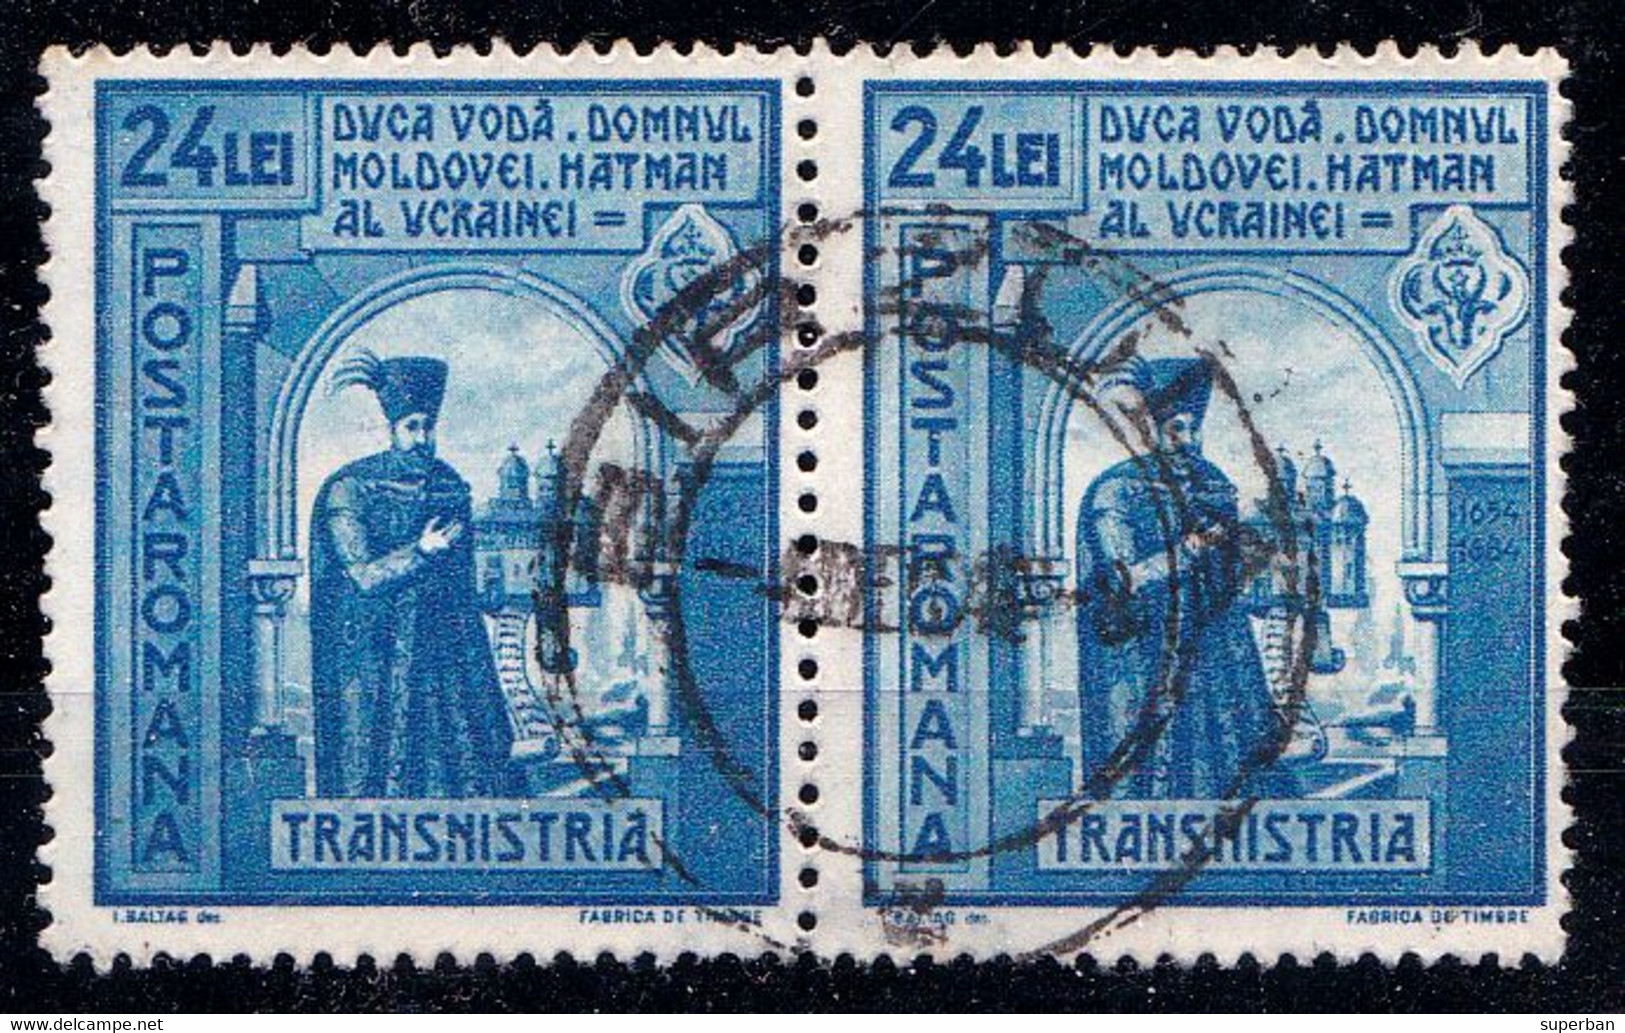 PAIRE De 2 TIMBRES / PAIR Of 2 STAMPS : ROMANIA - TRANSNISTRIA - CANCELLATION : BIRZULA - 1943 (af825) - 2. Weltkrieg (Briefe)